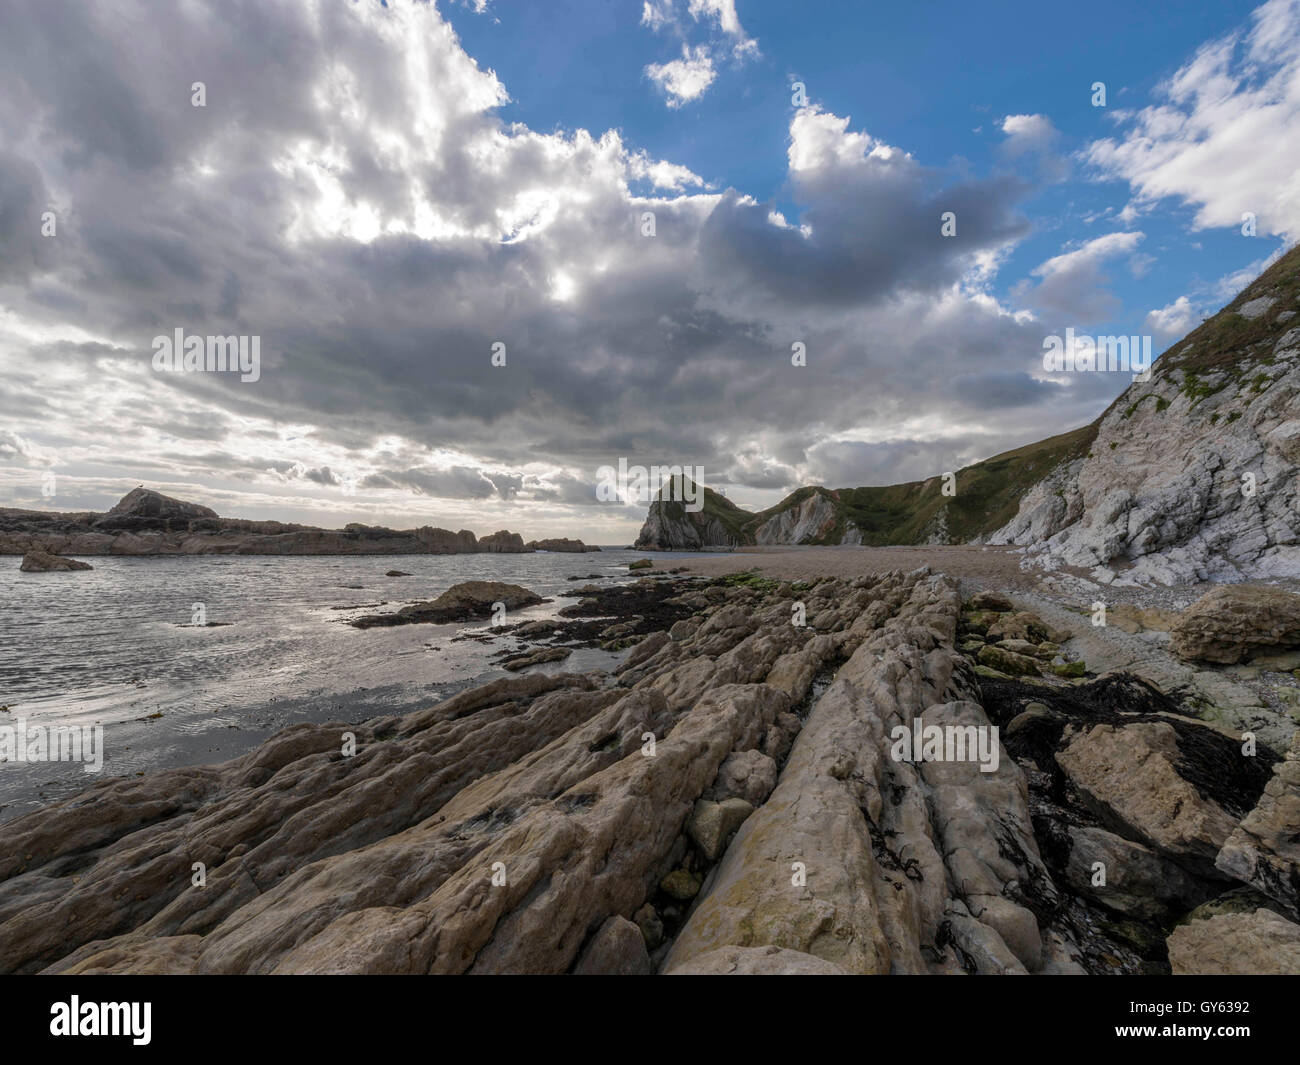 Landscape depicting the rocky shoreline of Man O'War beach on a fine summer day with Durdle Door headland in the background. Stock Photo